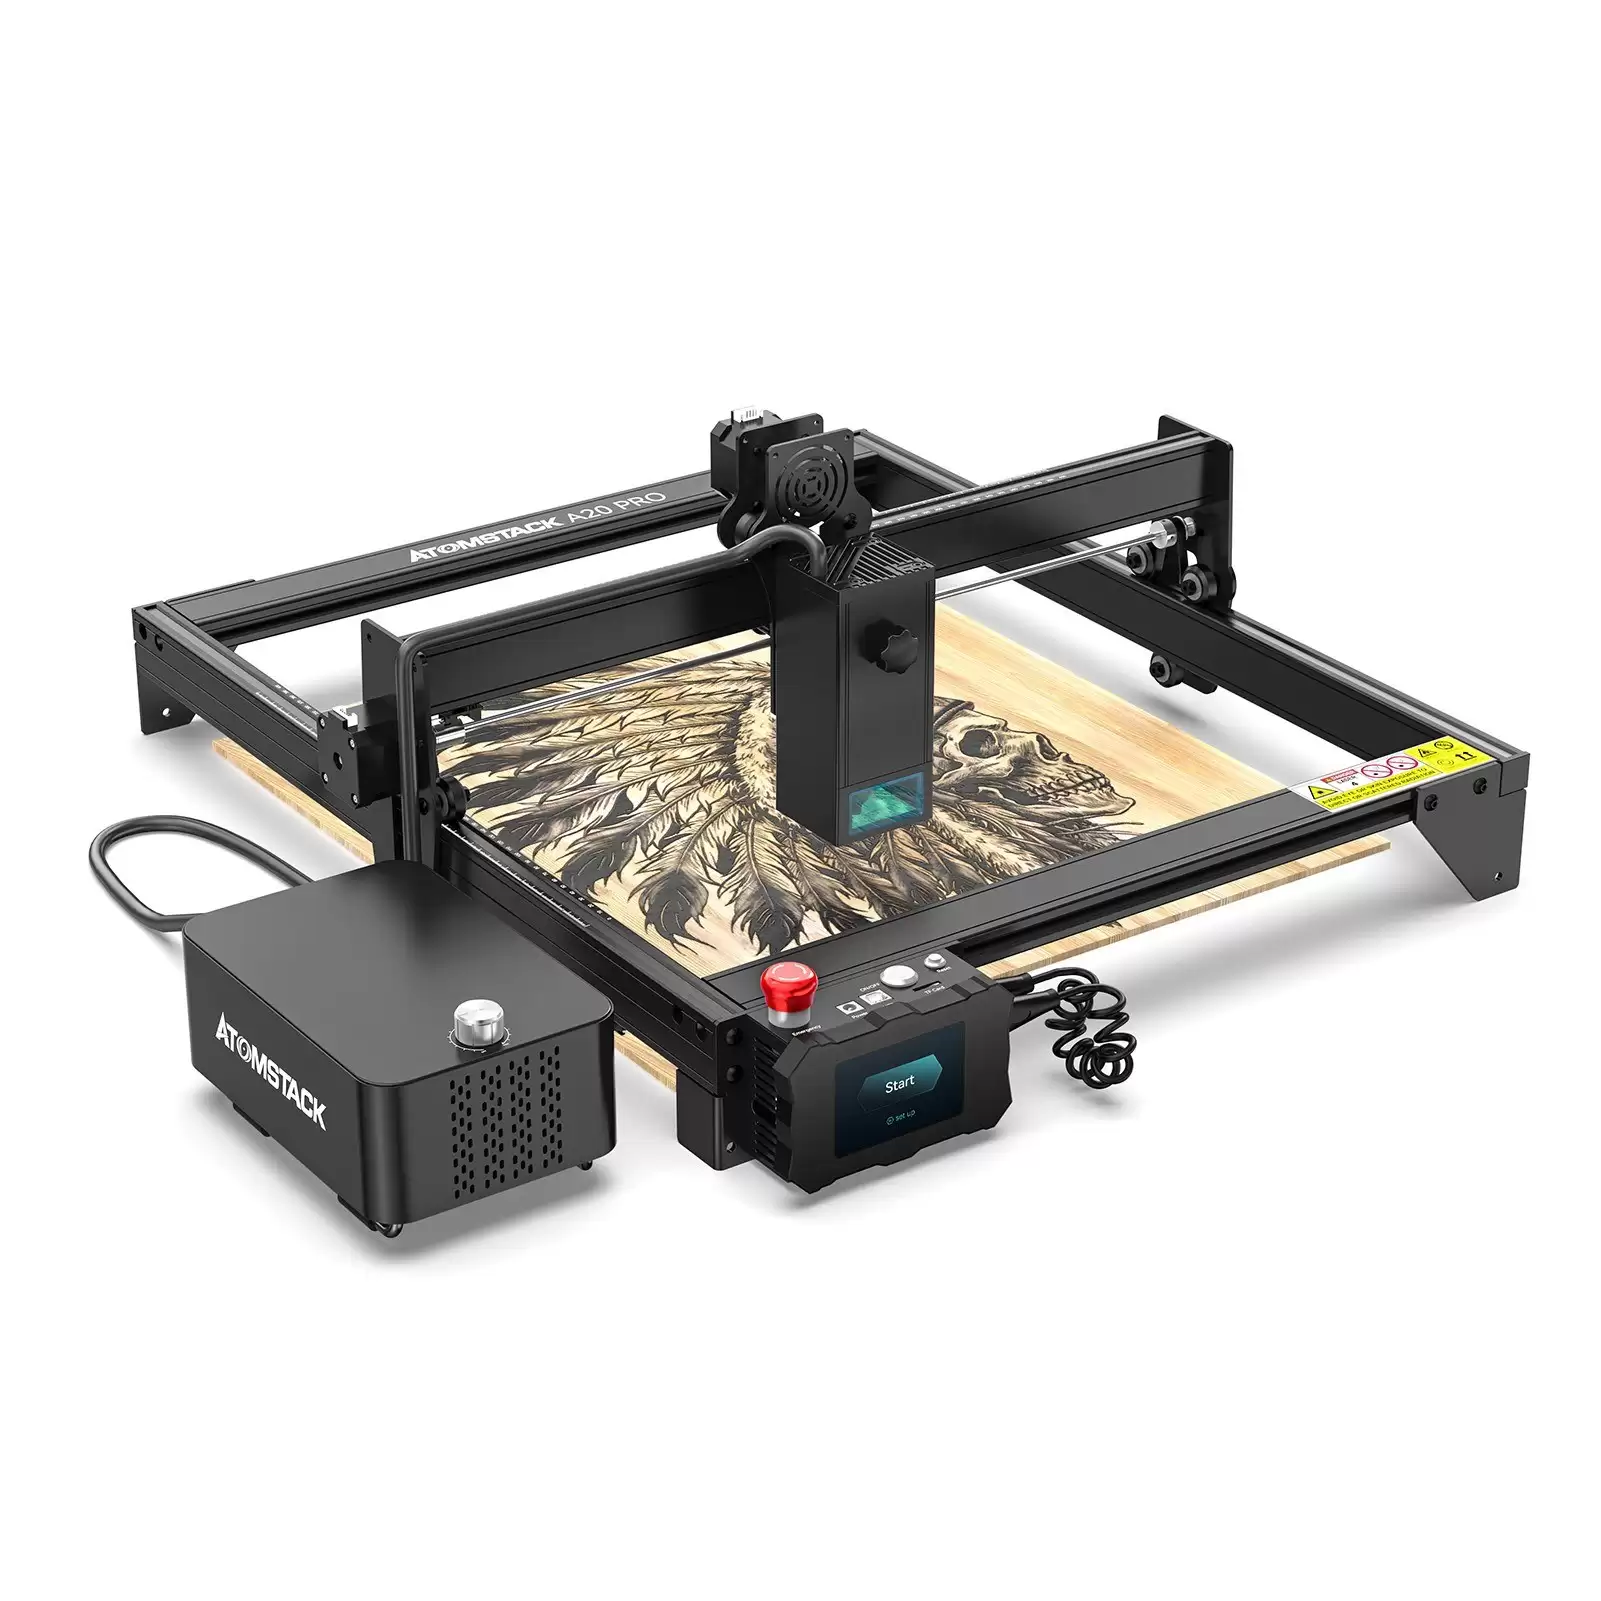 Order In Just $595 Atomstack A20 Pro 20w Laser Engraving Cutting Machine With Air Assist Accessory Using This Tomtop Discount Code